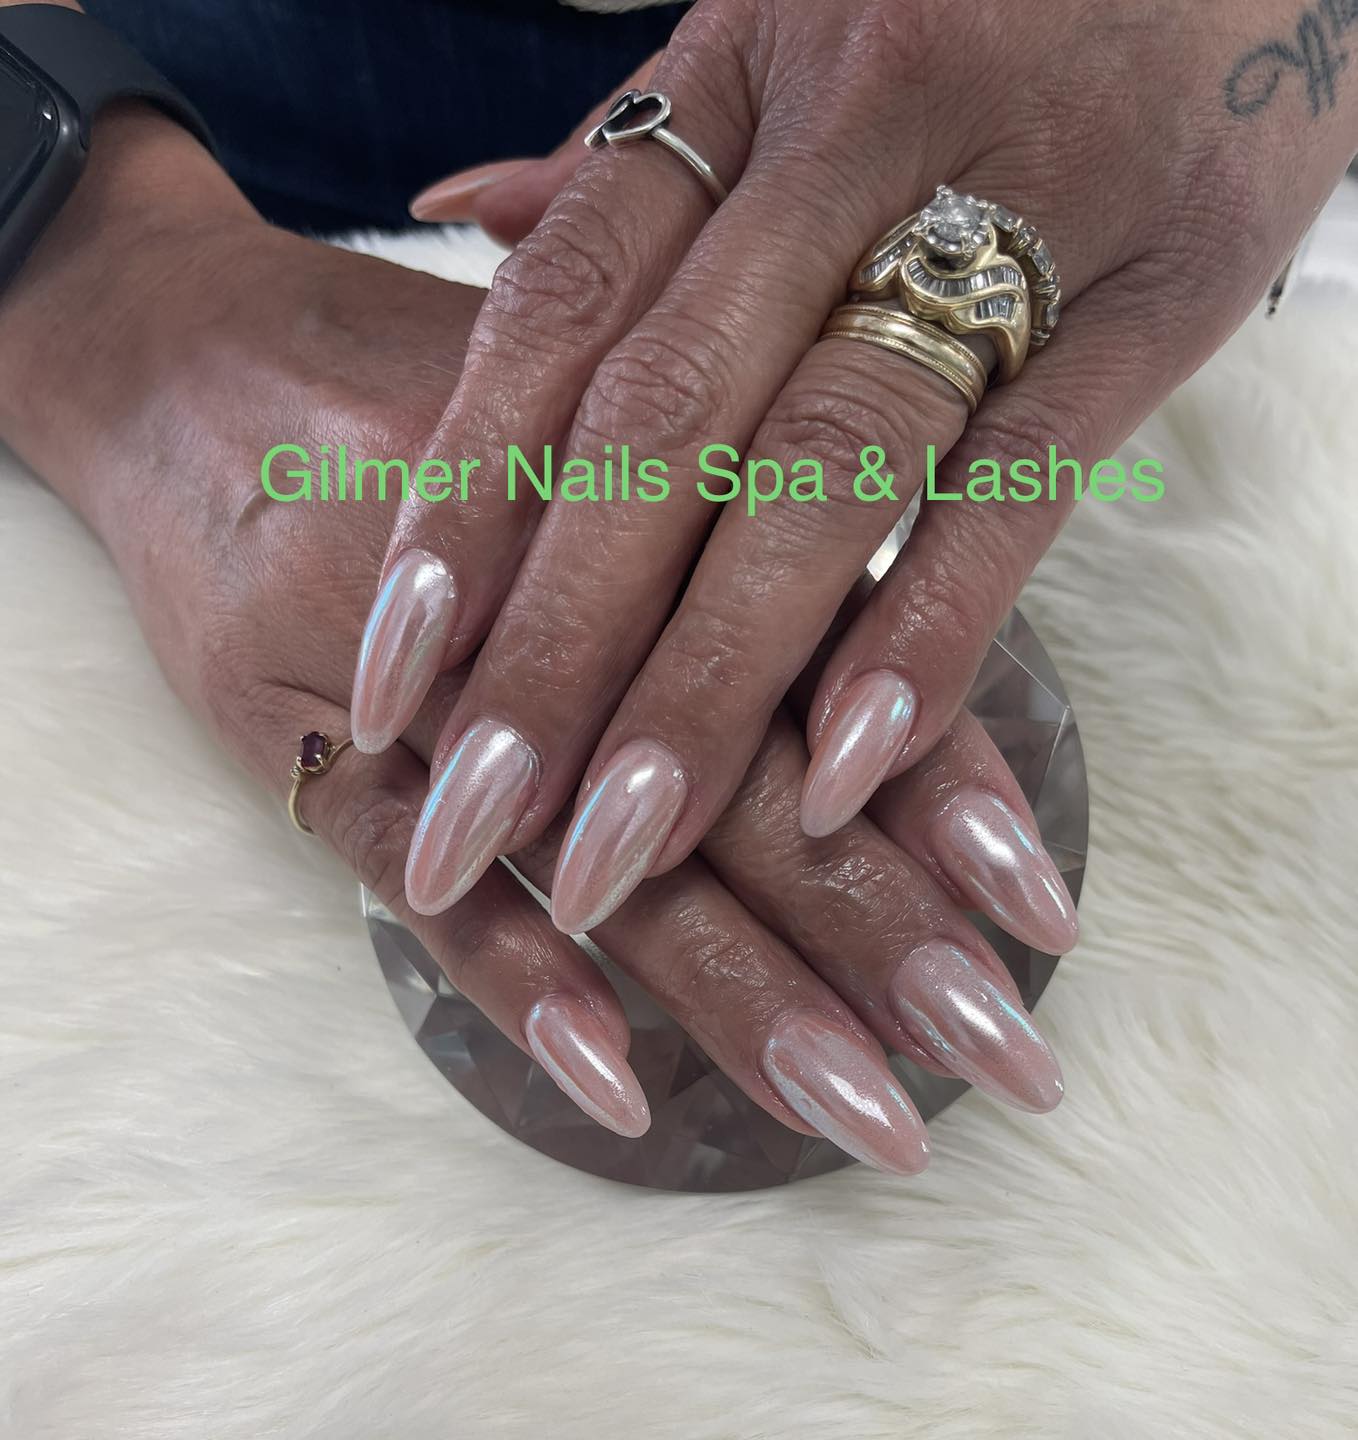 Gilmer Nails Spa and Lashes 1071 US Hwy 271 N SUITE 101, Gilmer Texas 75644